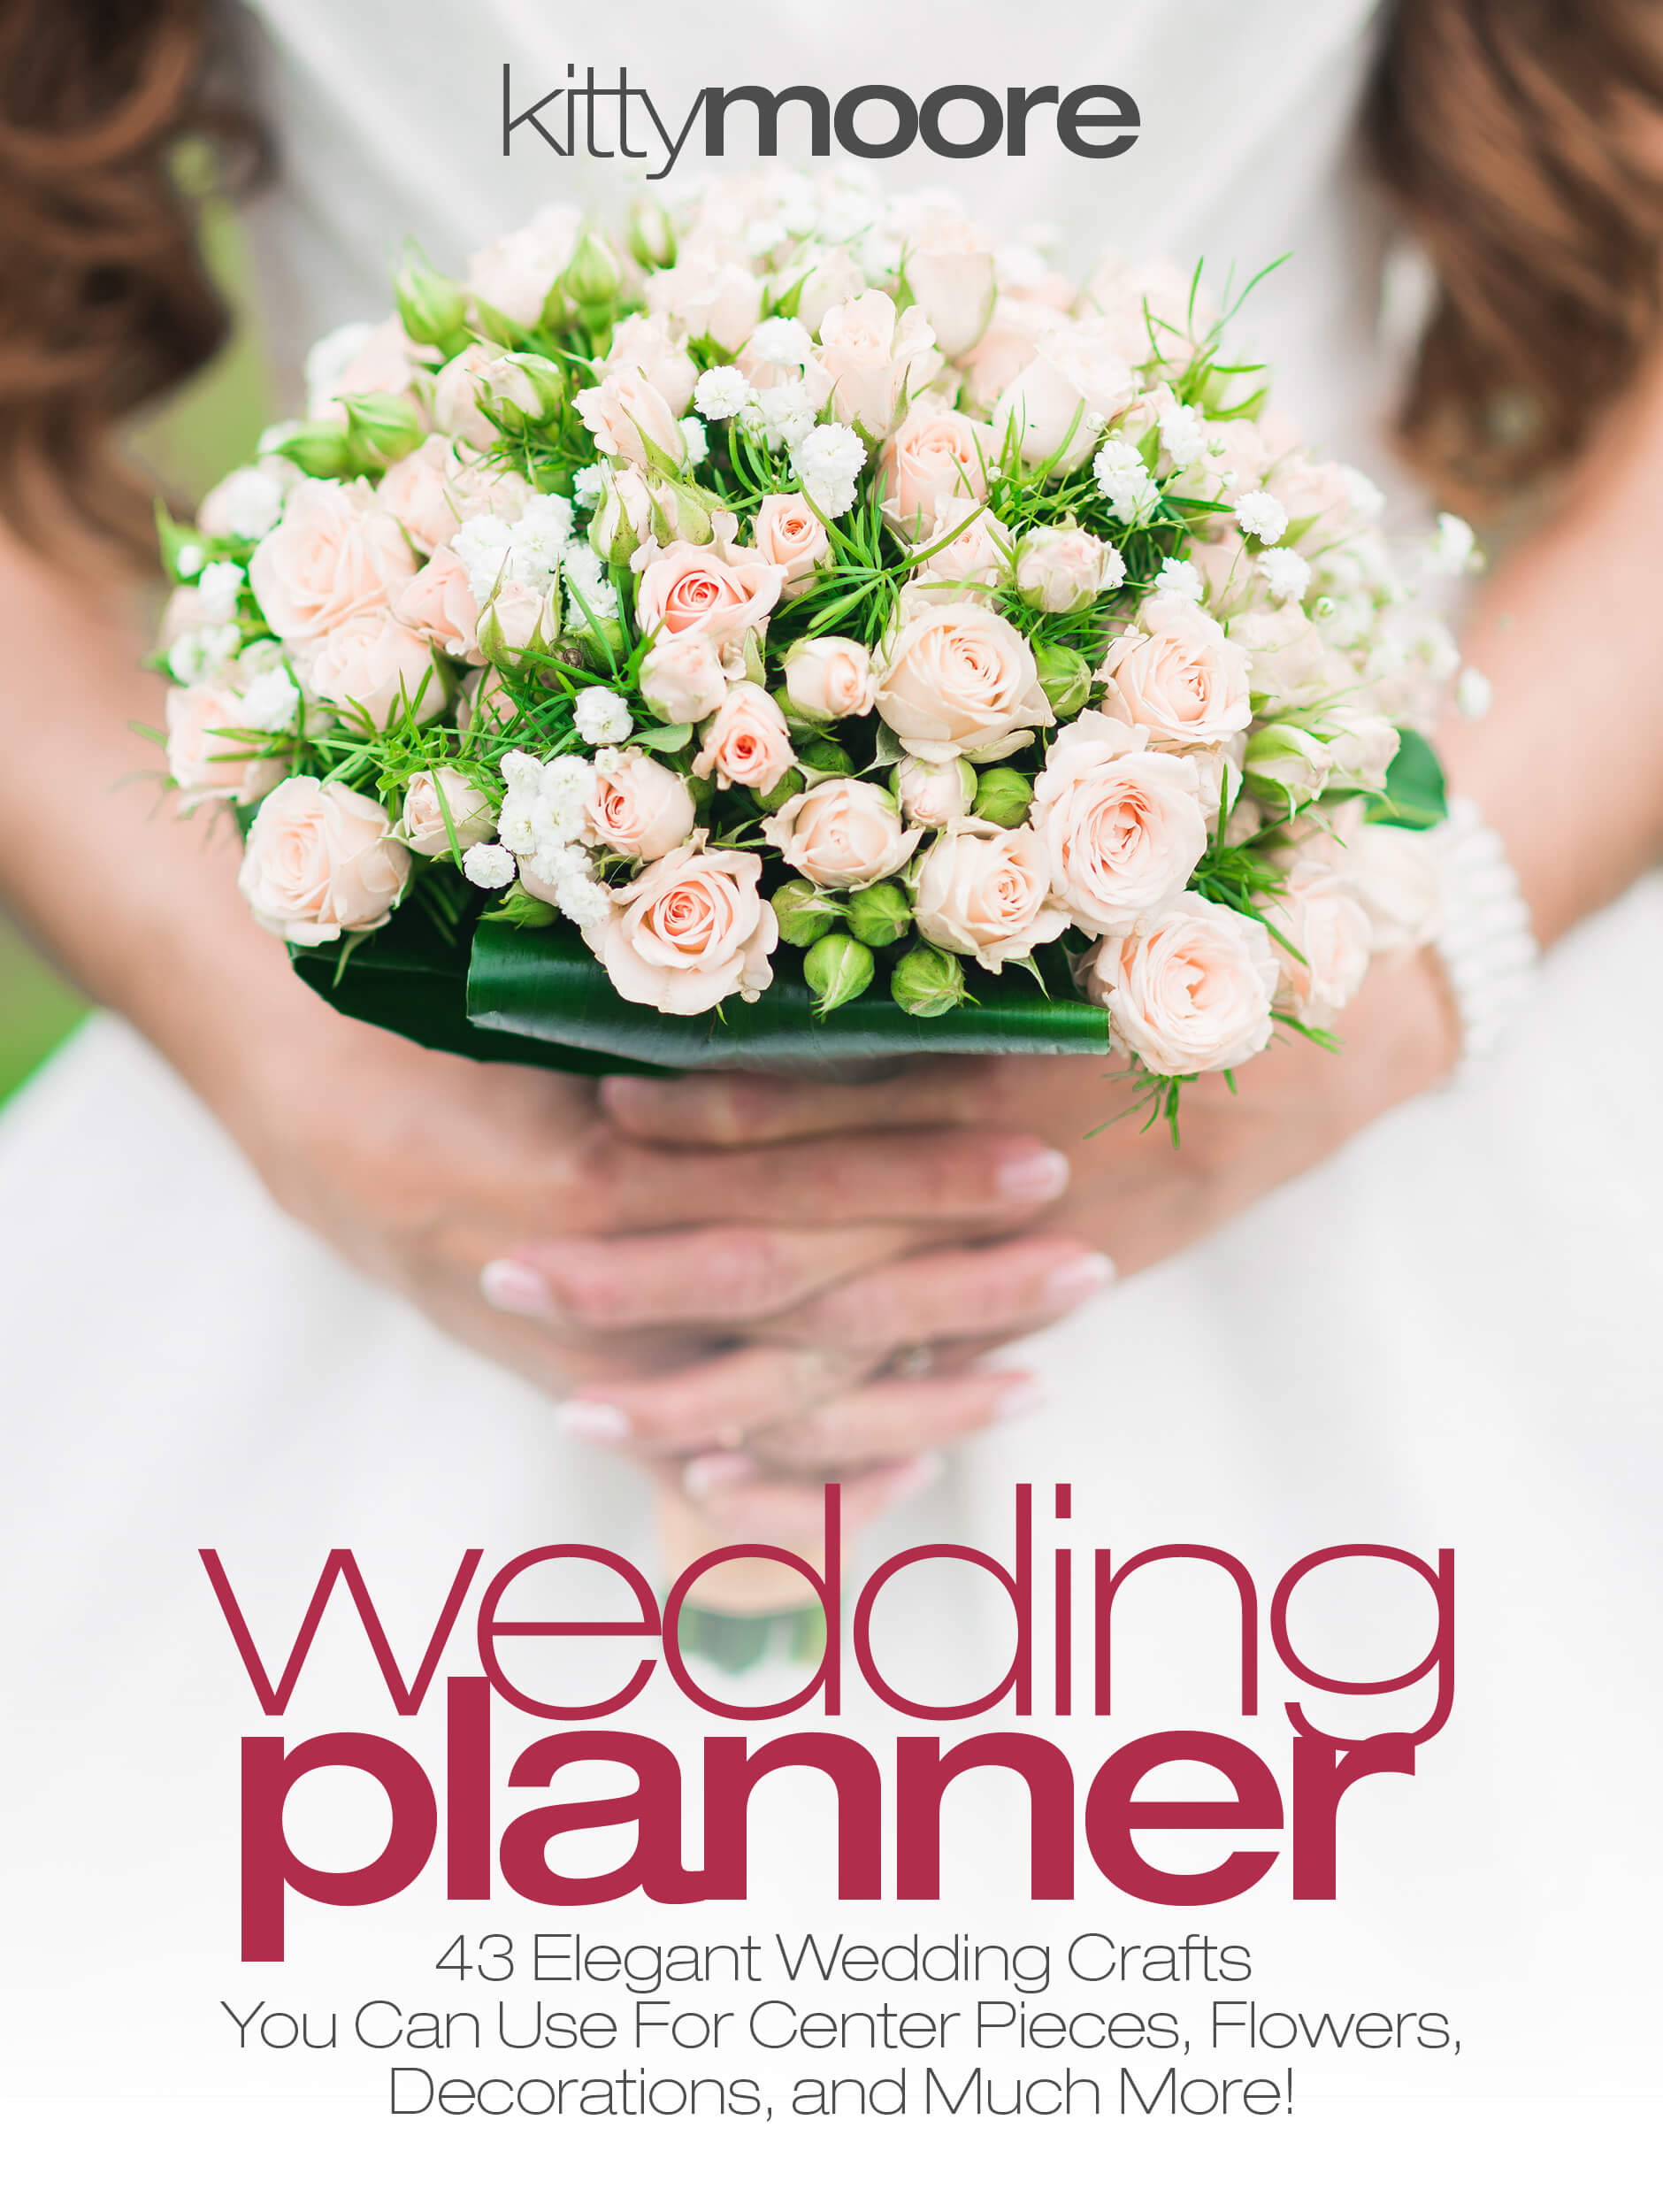 FREE: Wedding Planner (3rd Edition): 43 Elegant Wedding Crafts You Can Use For Center Pieces, Flowers, Decorations, And Much More! by Kitty Moore